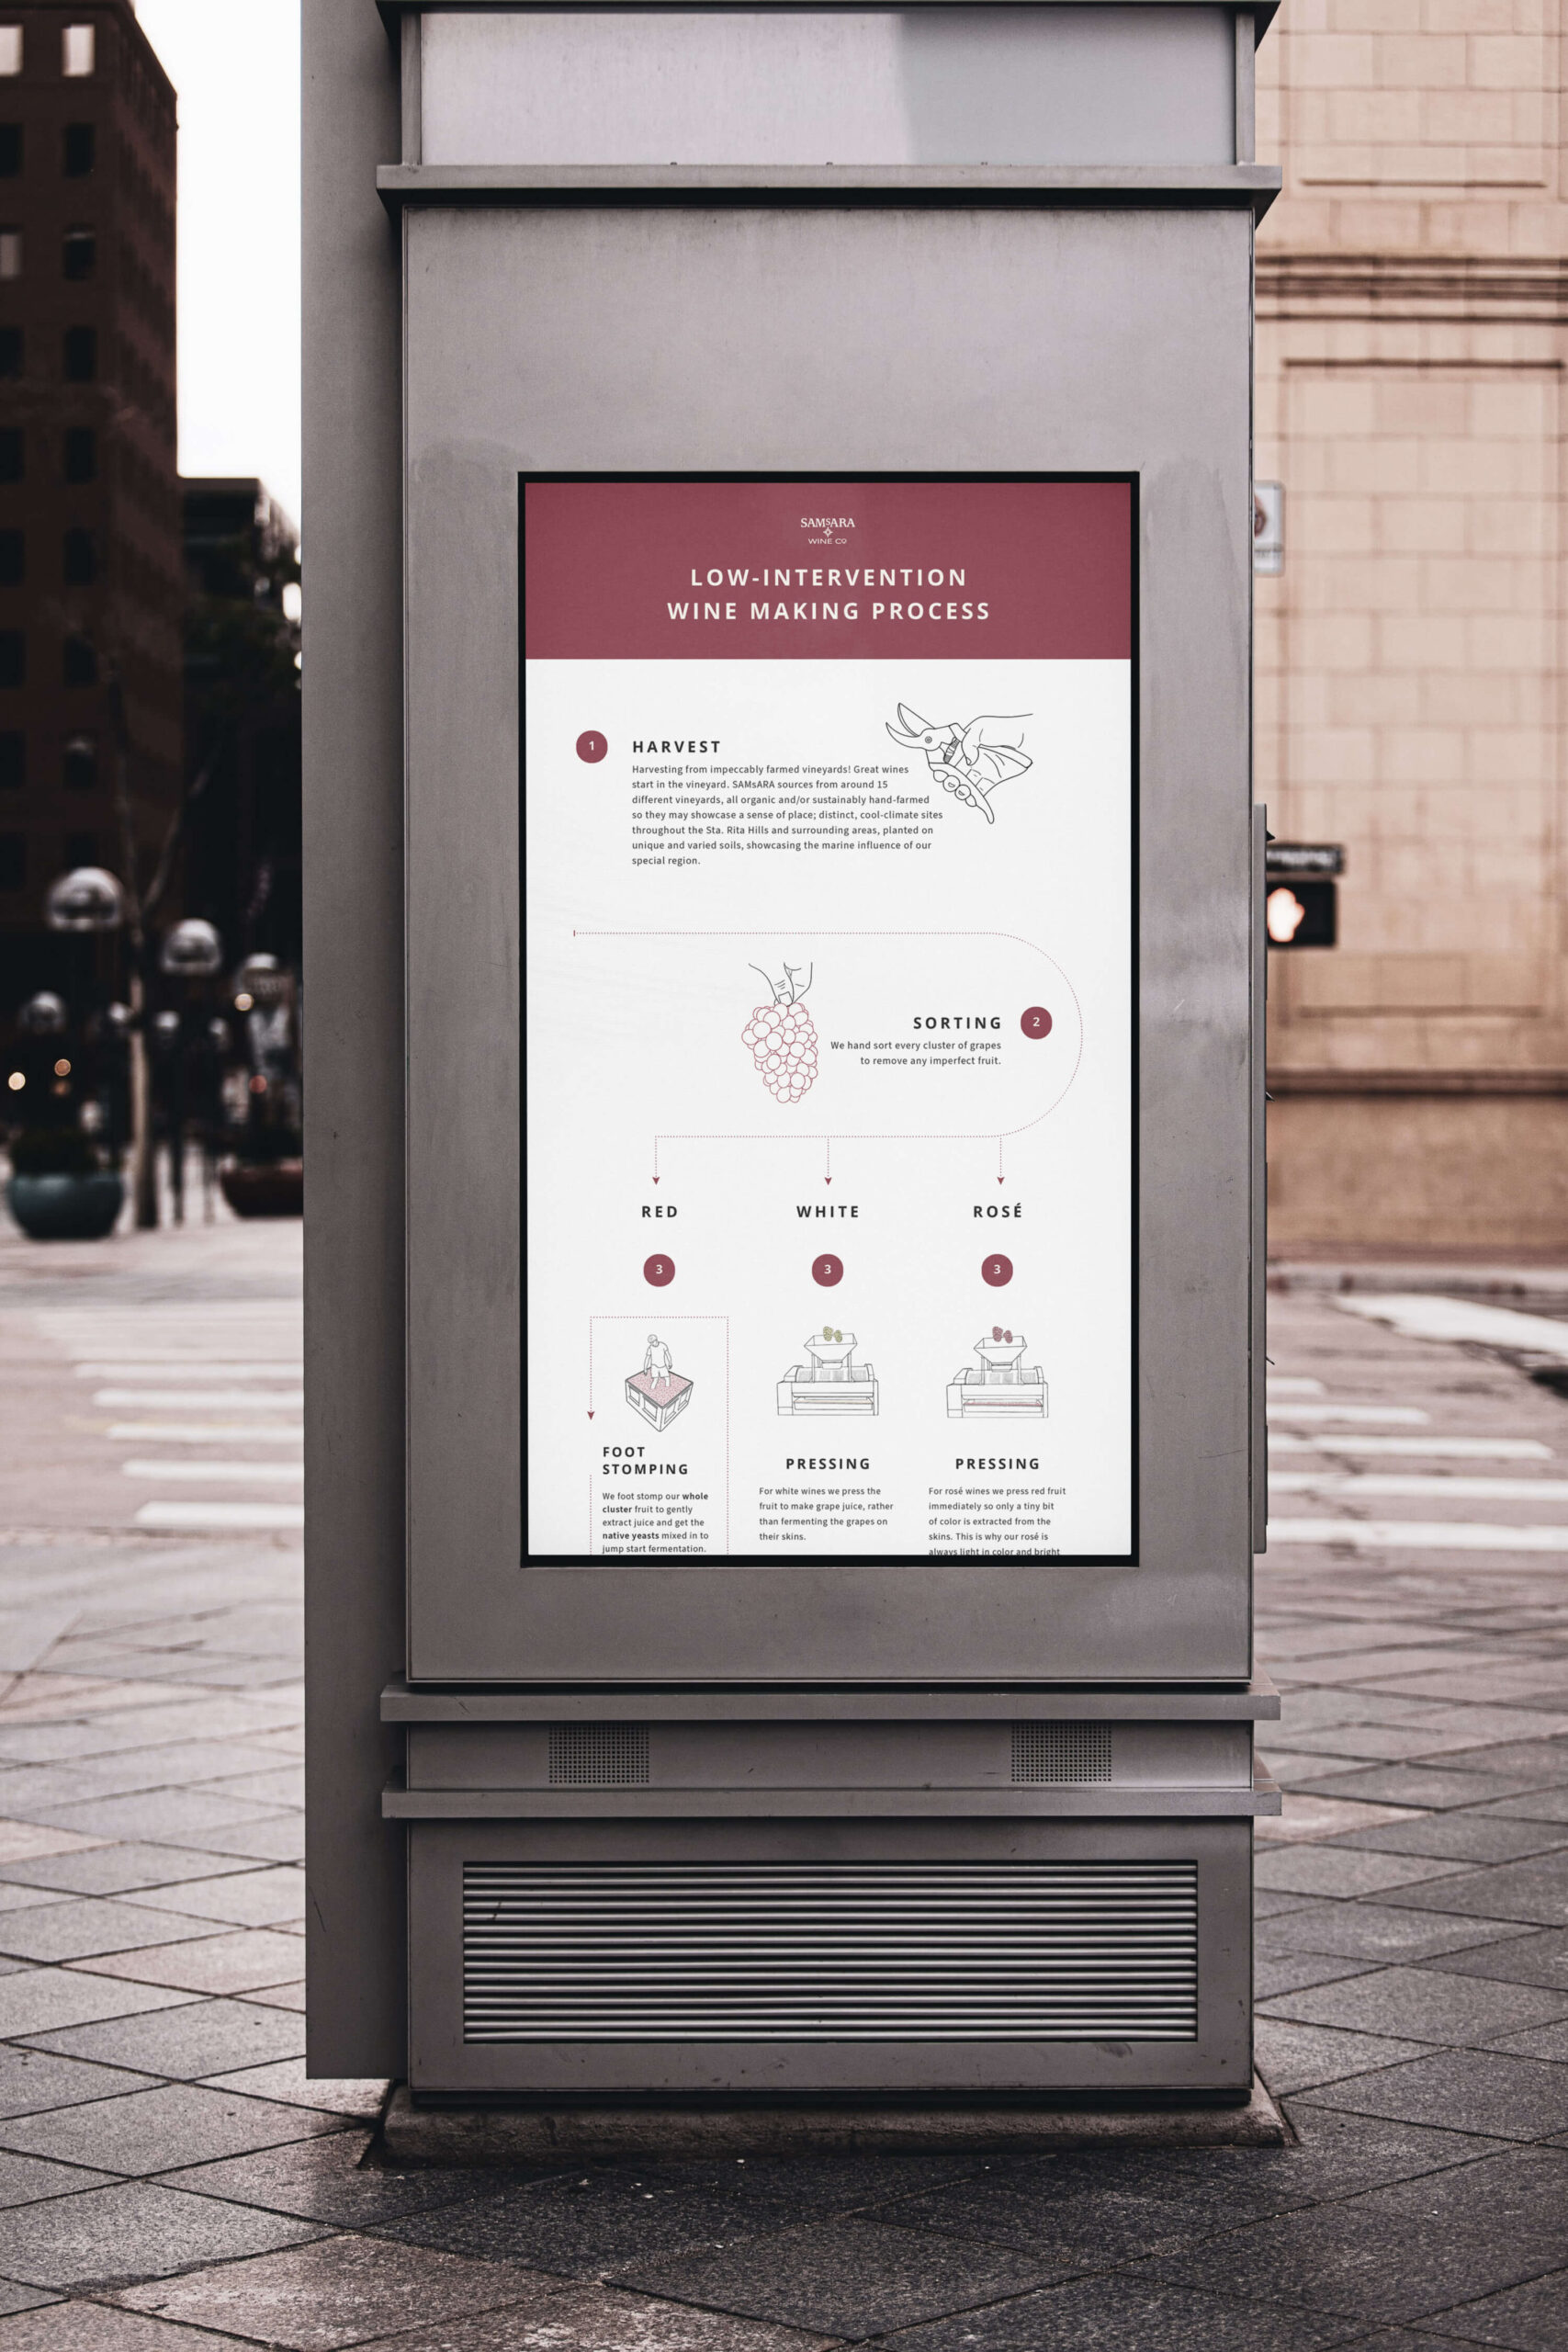 Poster display in a town square with an infographic illustrating low-intervention wine making techniques.